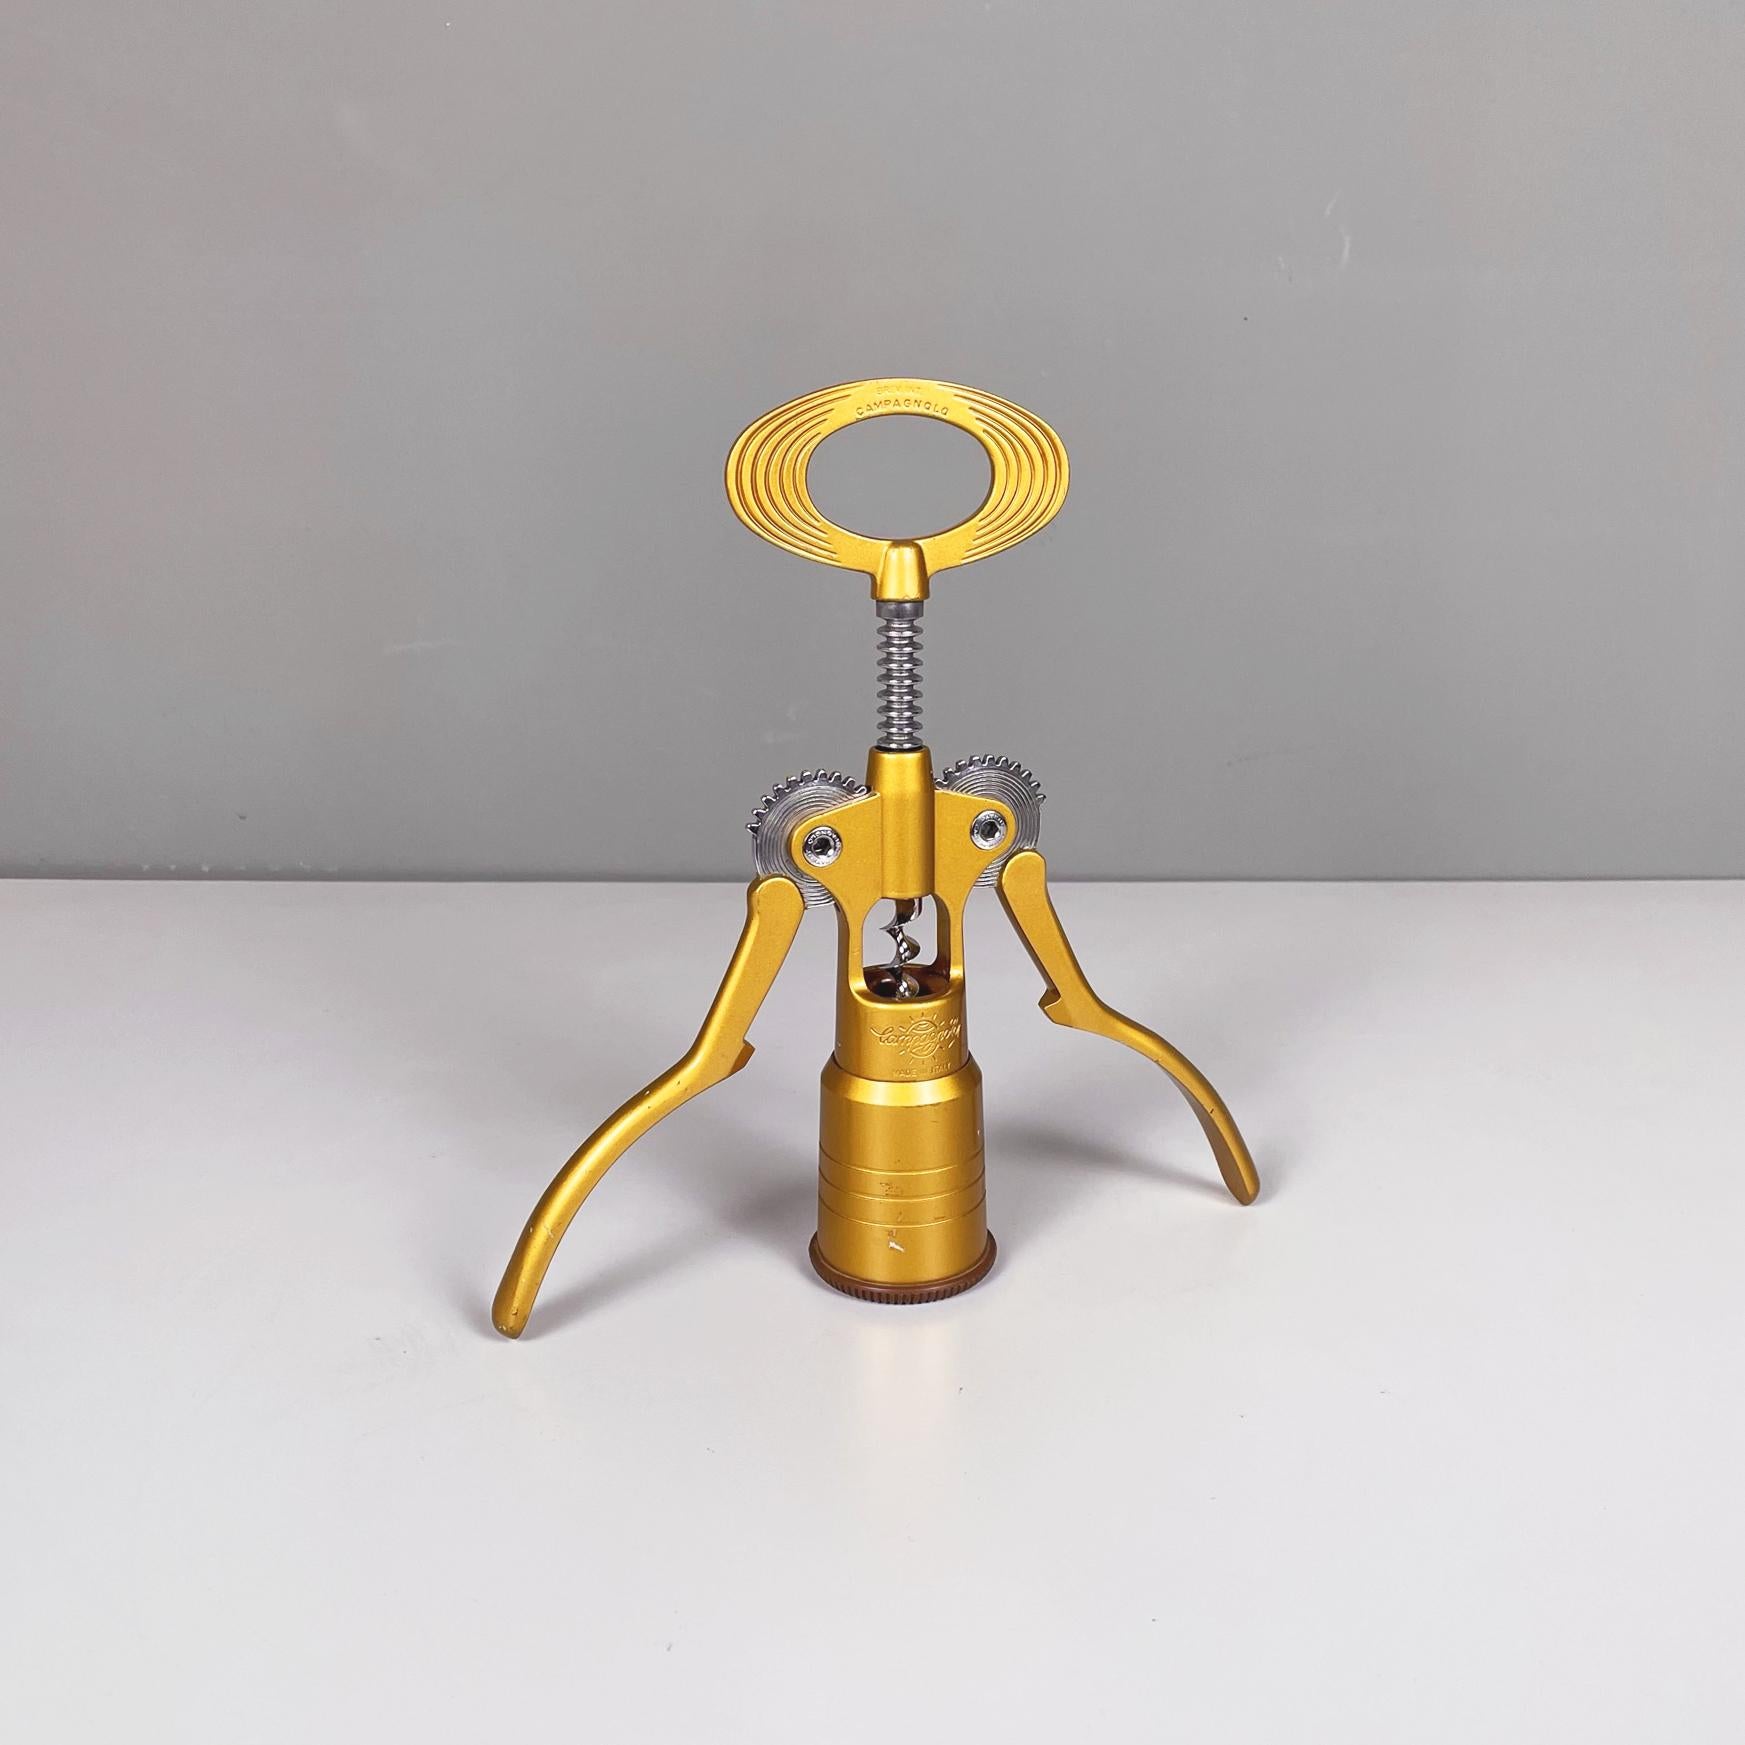 Italian midcentury gold metal Corkscrew mod. Big by Tullio Campagnolo, 1970s
Bottle screw mod. Big with structure in gold painted metal and steel. On the bottom it has a brown plastic part.
Designed by Tullio Campagnolo in 1966. Logo